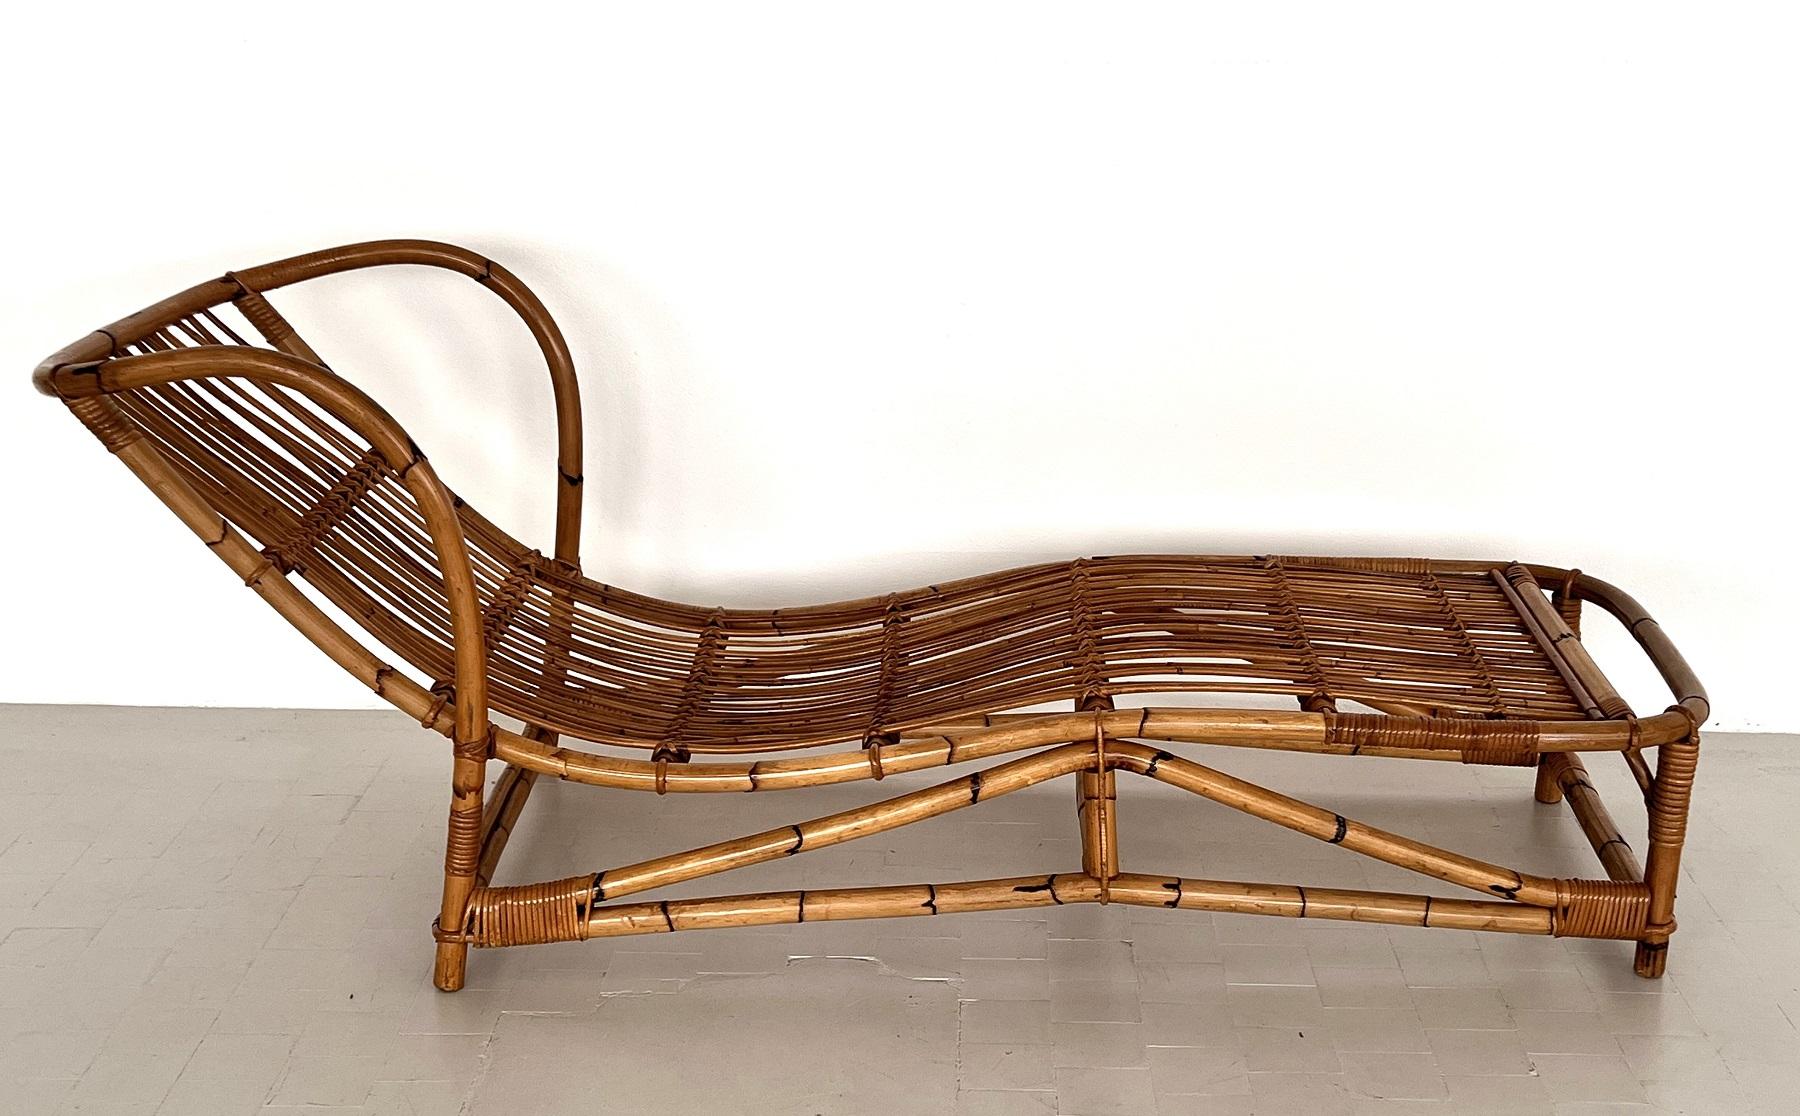 Beautiful organic daybed or sunbed hand-crafted of full bamboo with warm honey-colored patina.
Made in Italy in the 1960s in the style of Bonacina.
The daybed is in very good, solid original condition with its elegant lines and luxury shape, which